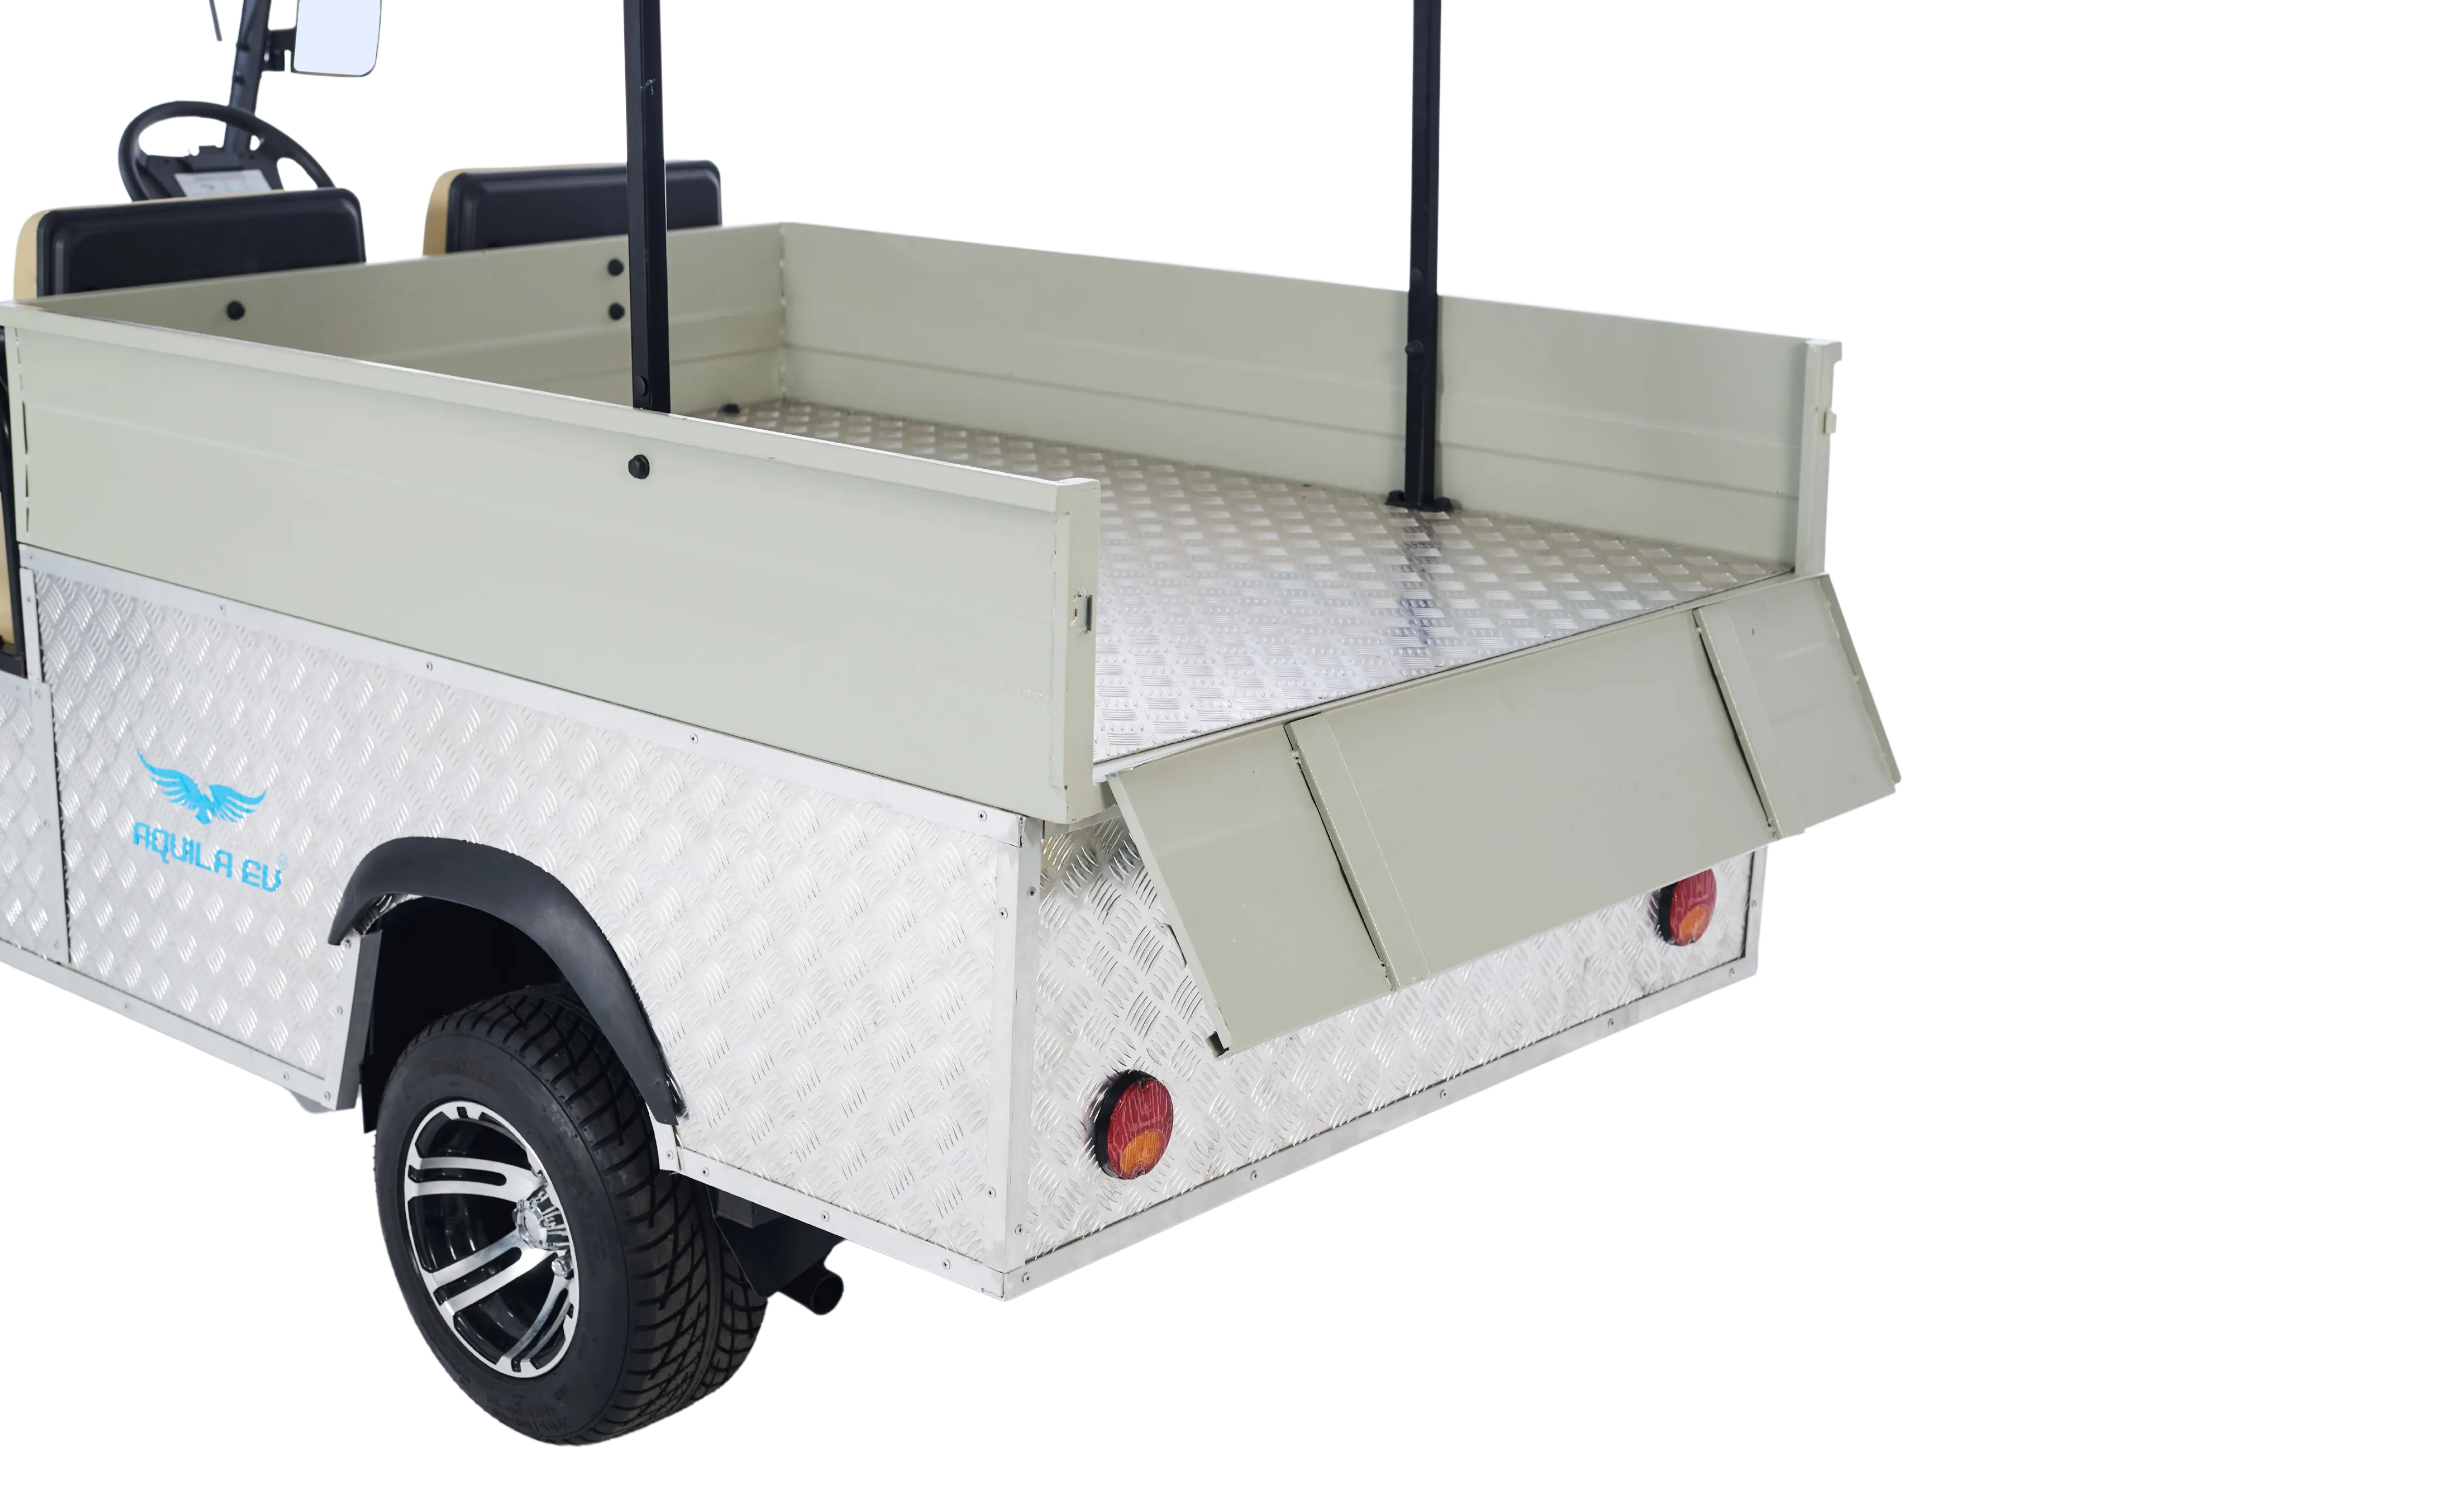 2 Seater Electric Cargo Vehicle - Tri Electric